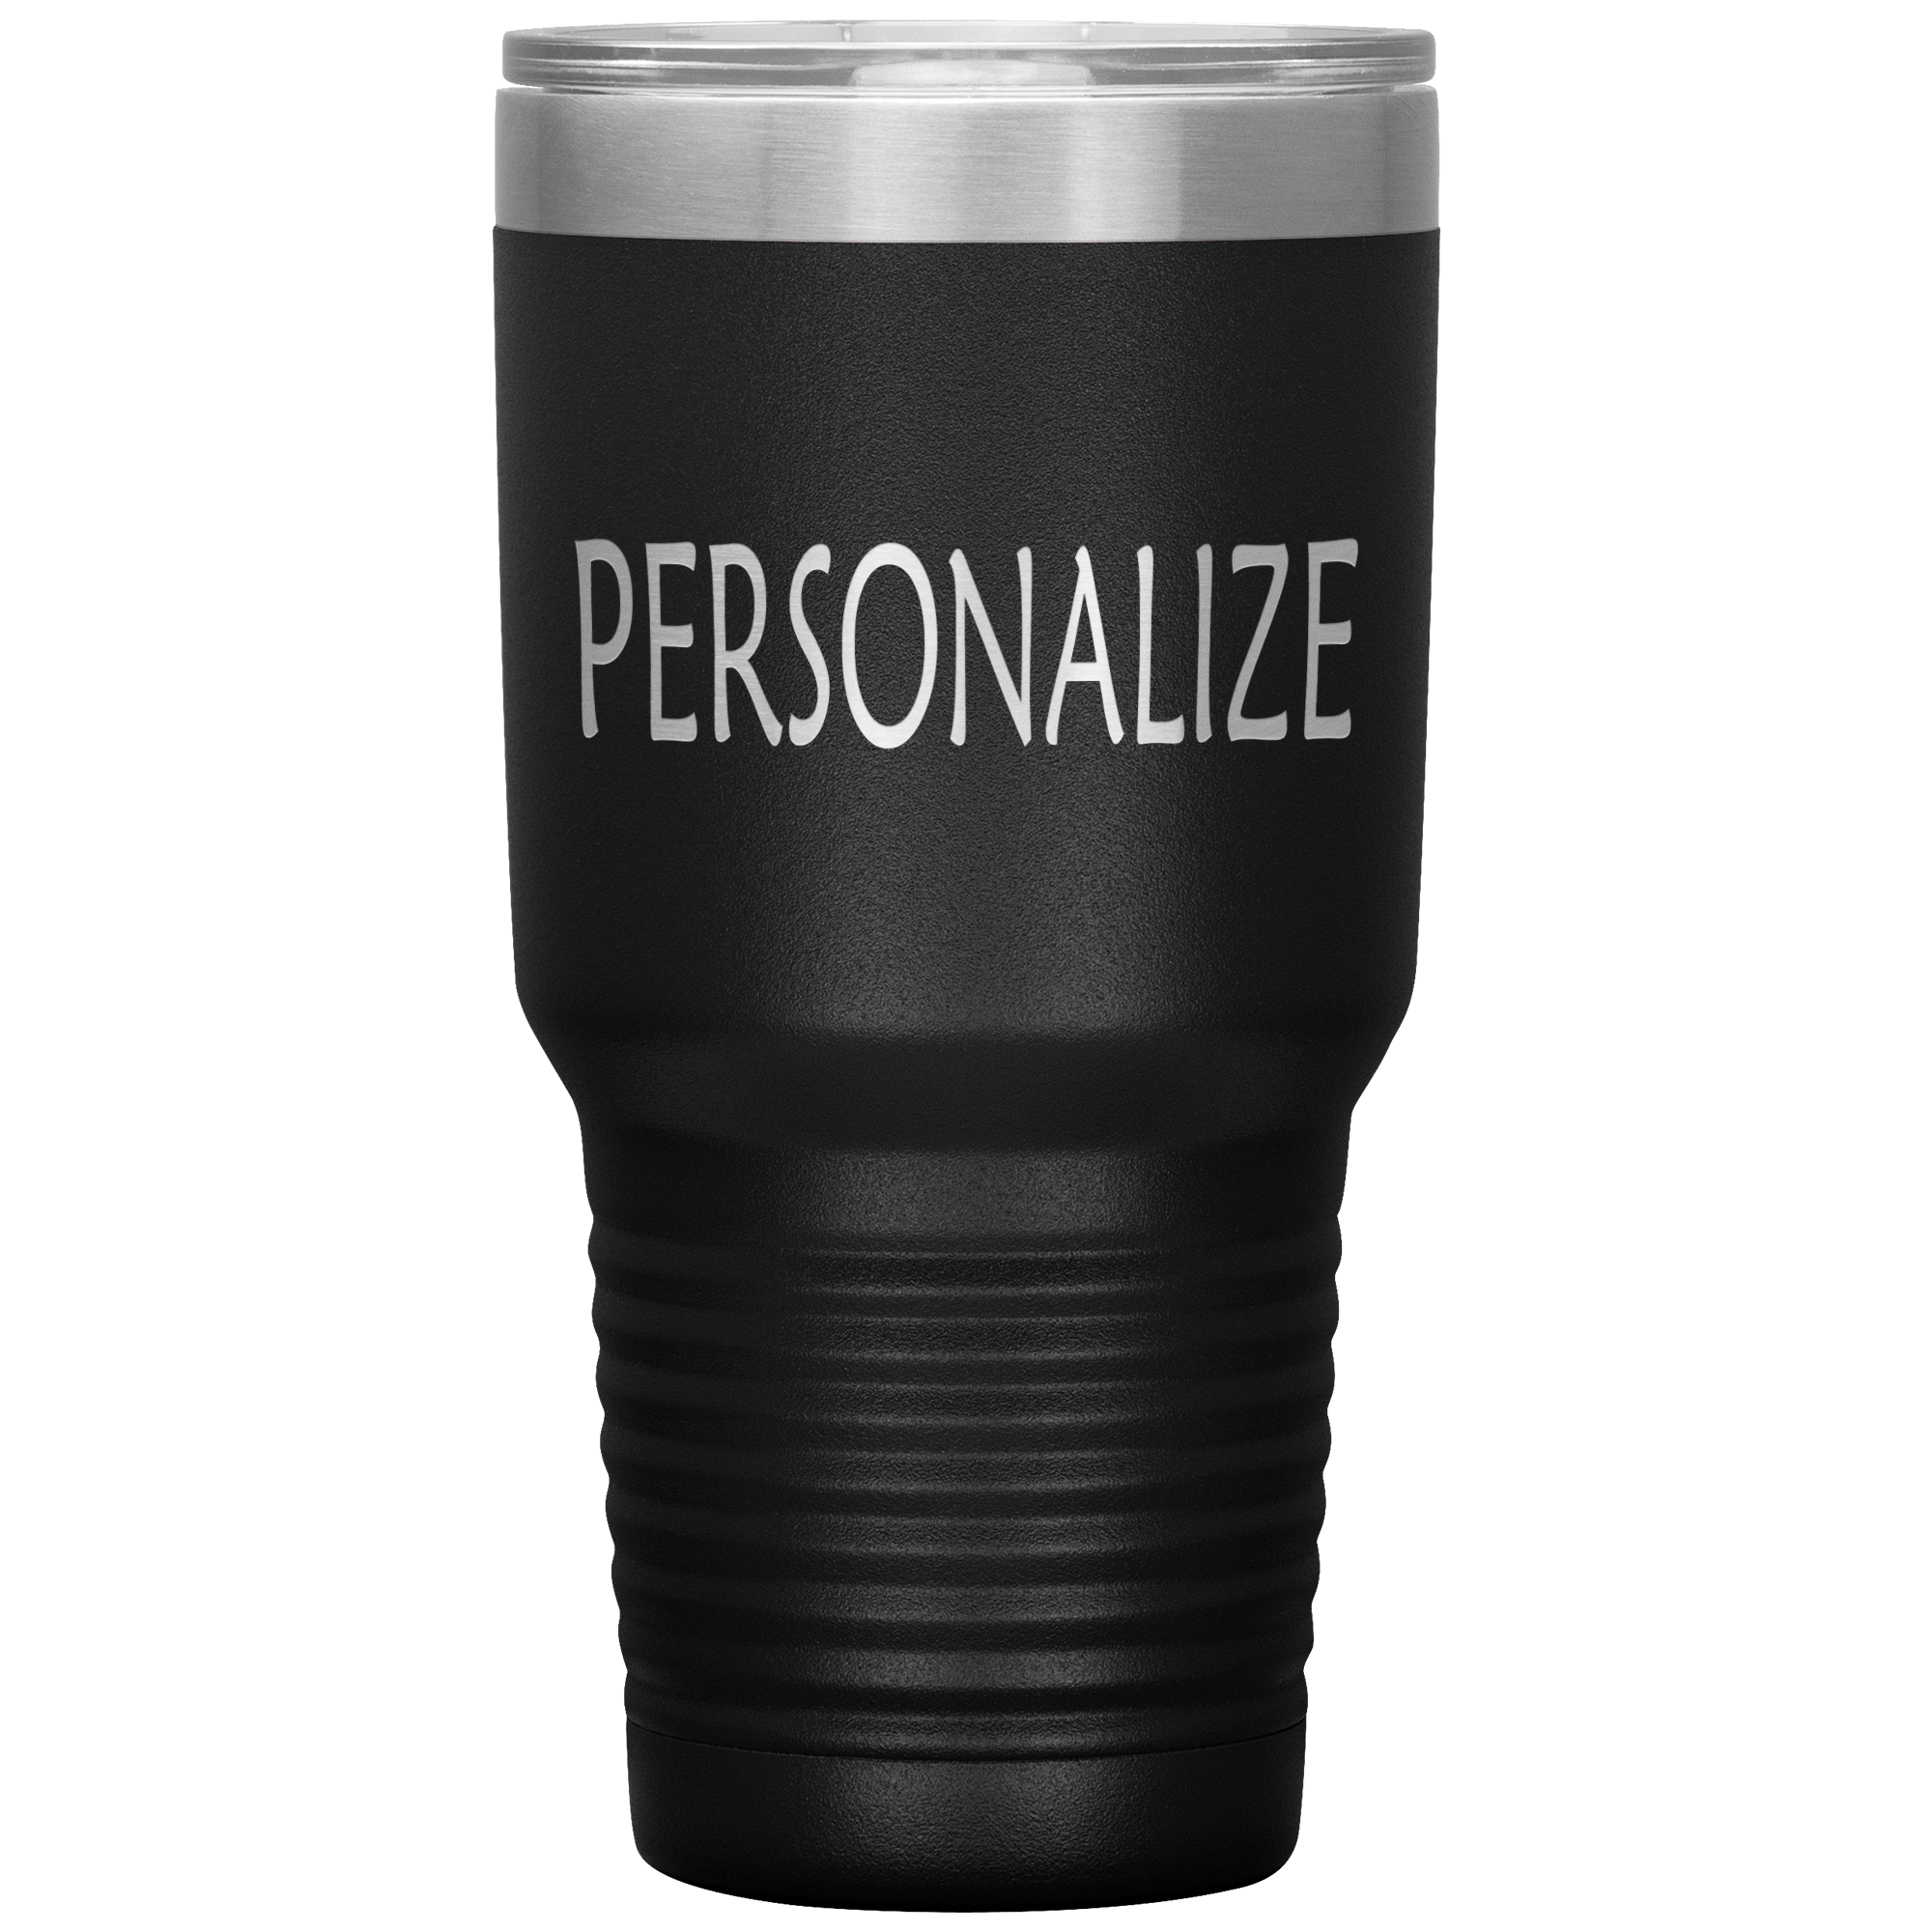 "Personalized or Customize your Tumbler"